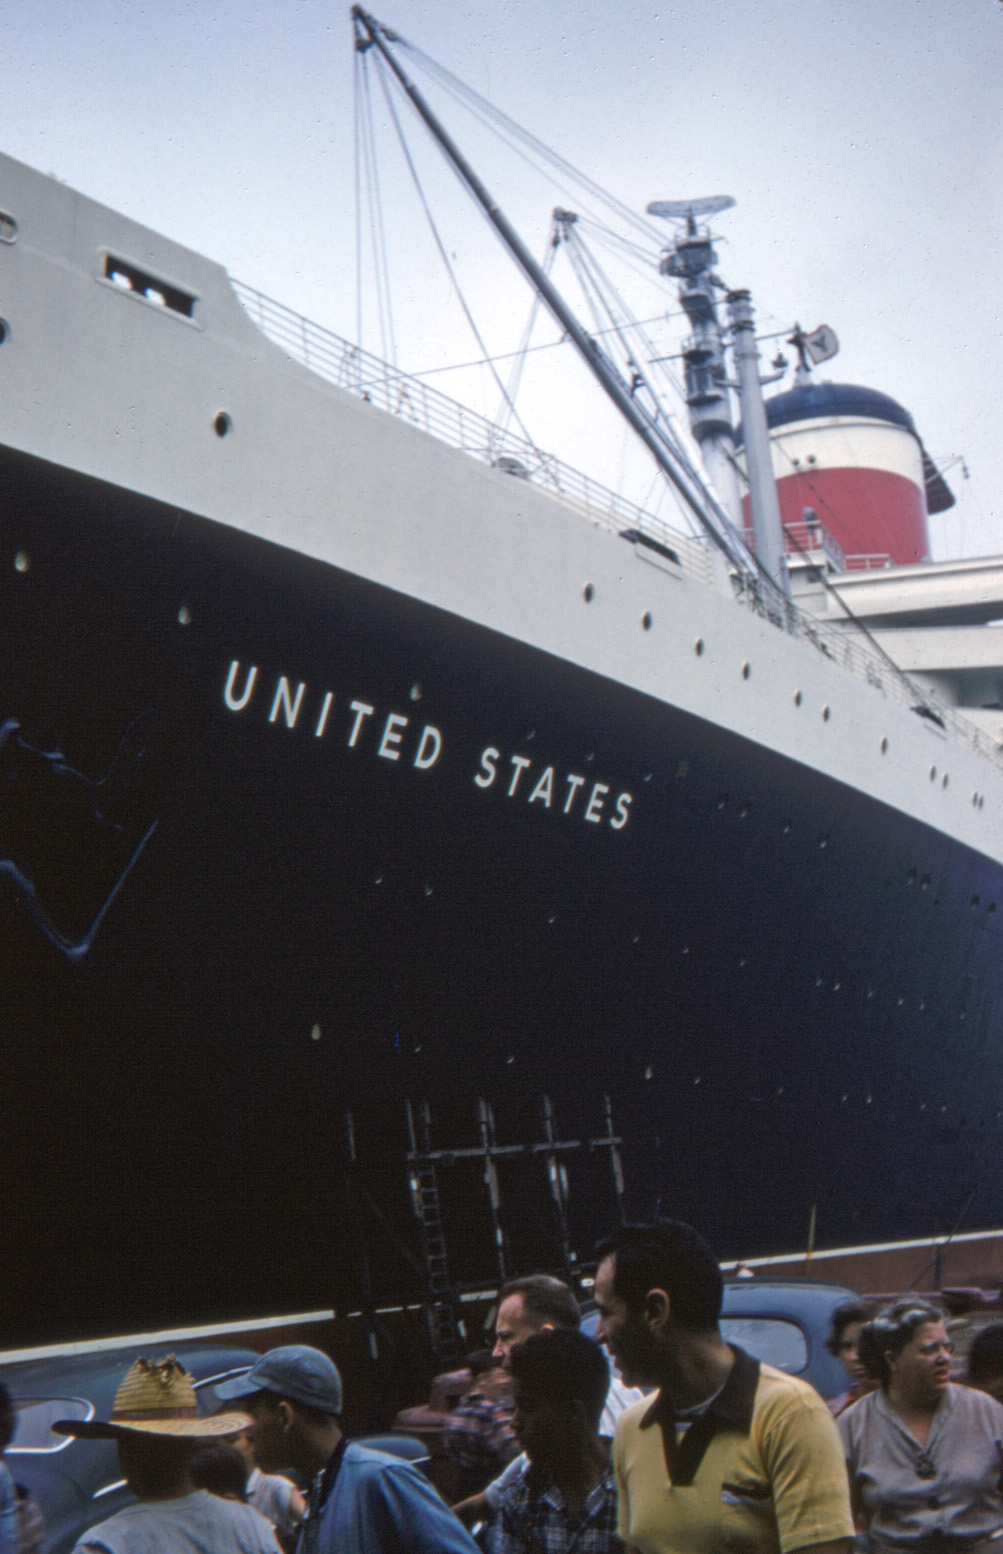 Built in the USA in 1952, The SS United States broke the speed record for Atlantic crossings in both directions. Scanned from a collection of 1100 slides found at an estate sale. View full size.